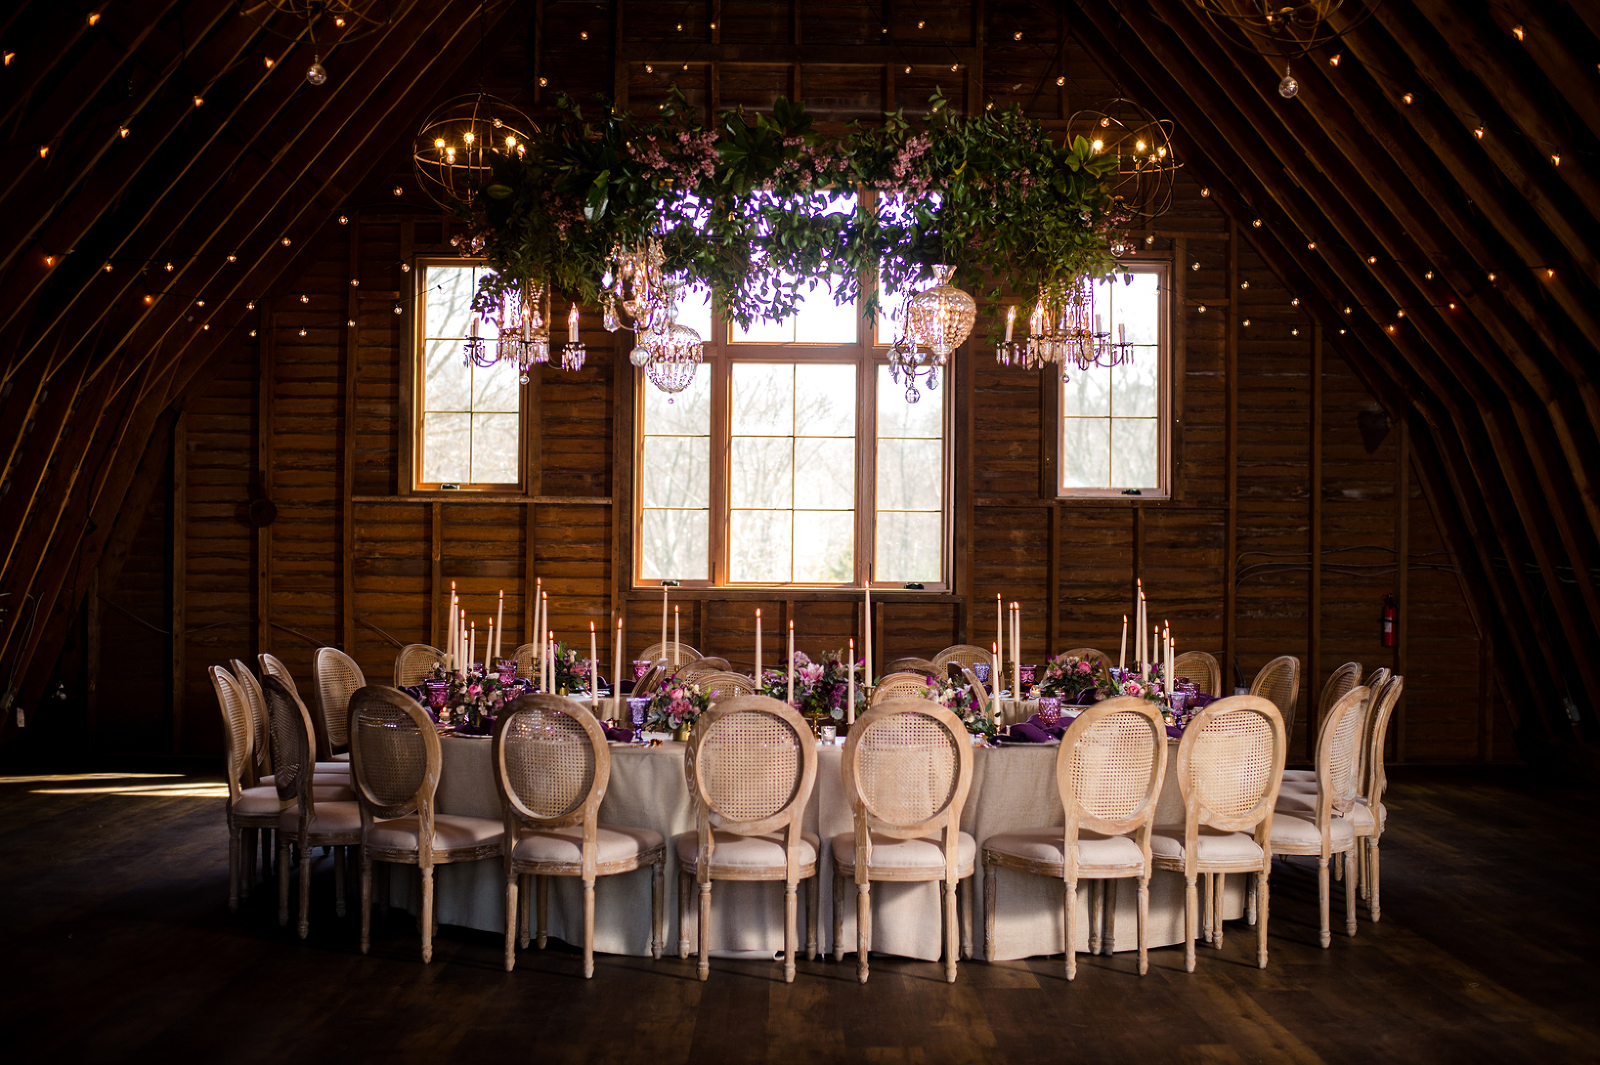 Upper Level Barn Seating in the Round and Overhead Floral Chandelier